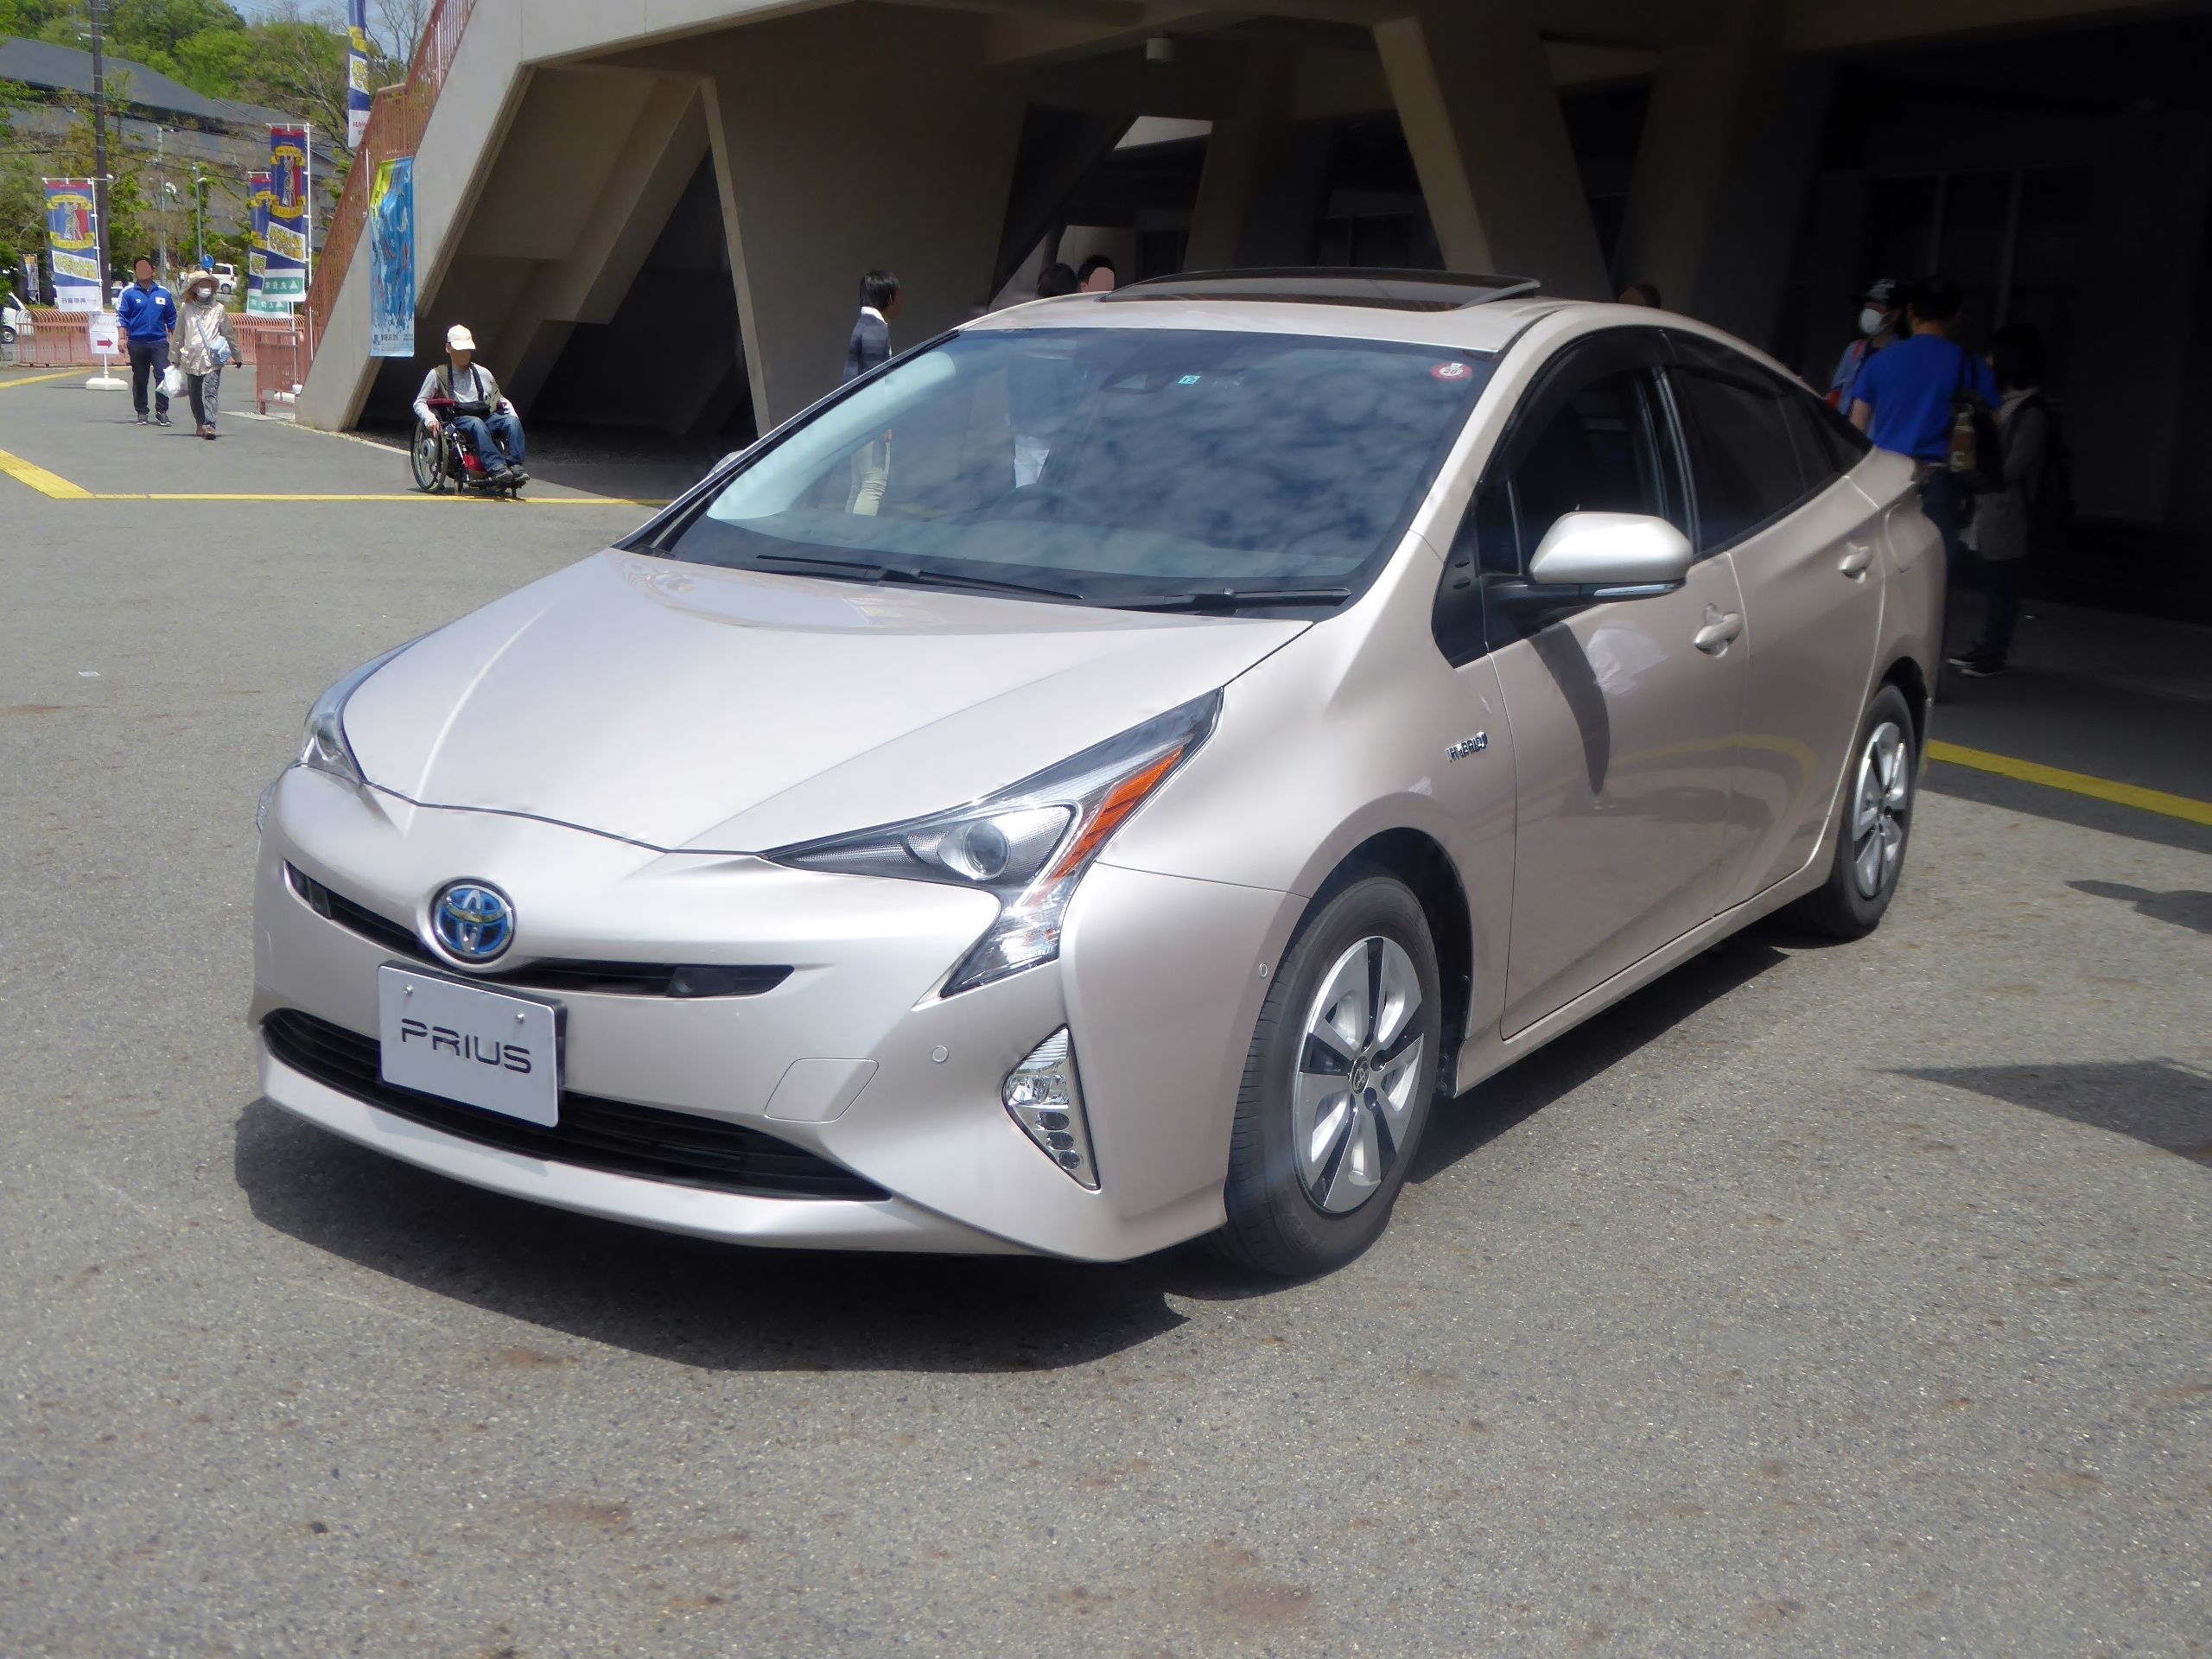 These Are The Reasons Behind The Rise And Fall Of The Iconic Toyota Prius